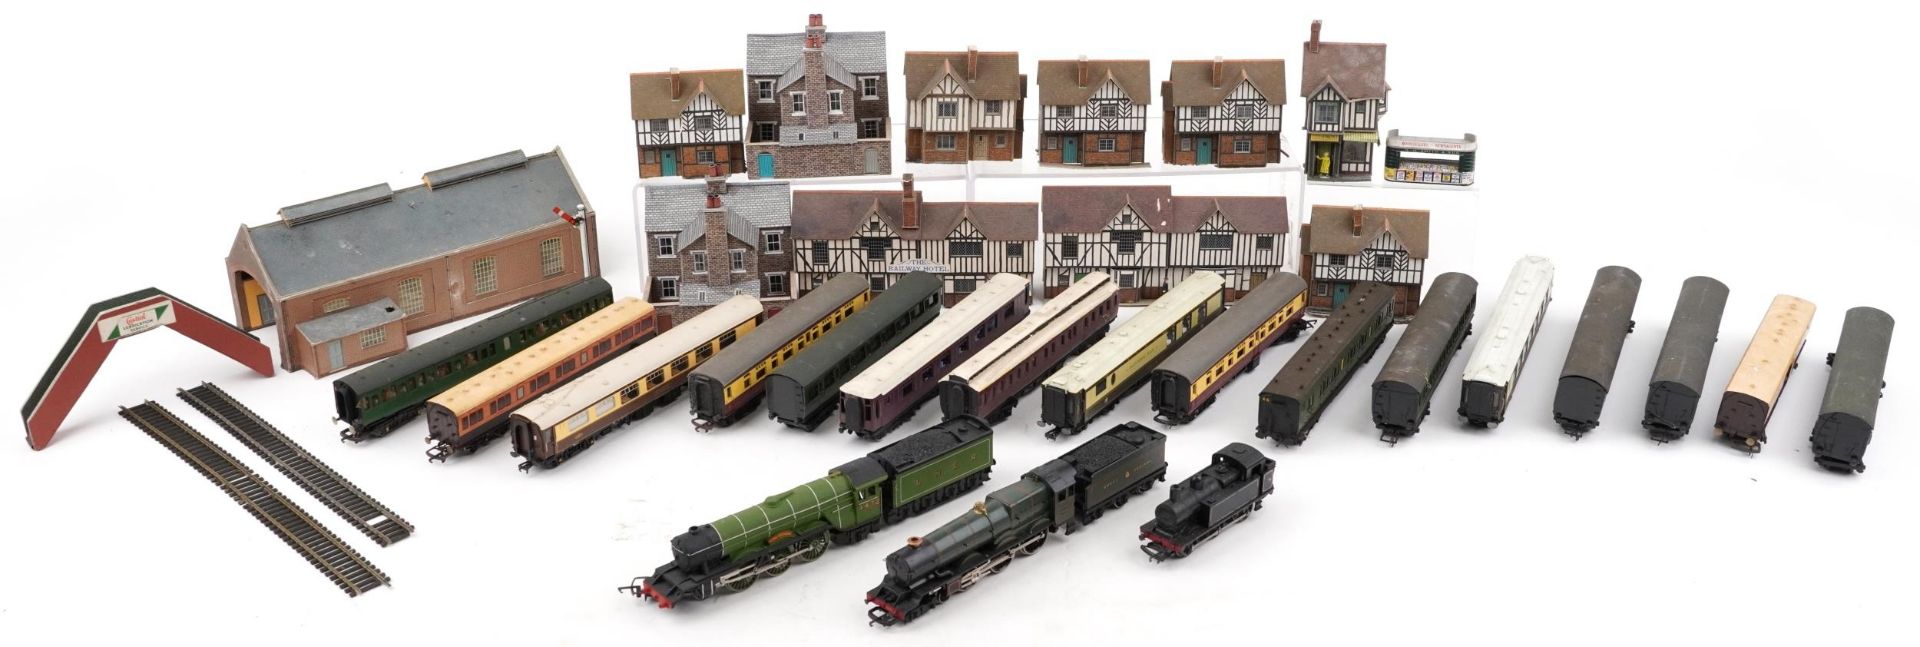 OO gauge model railway and accessories including Lima King George V locomotive with tender, Hornby